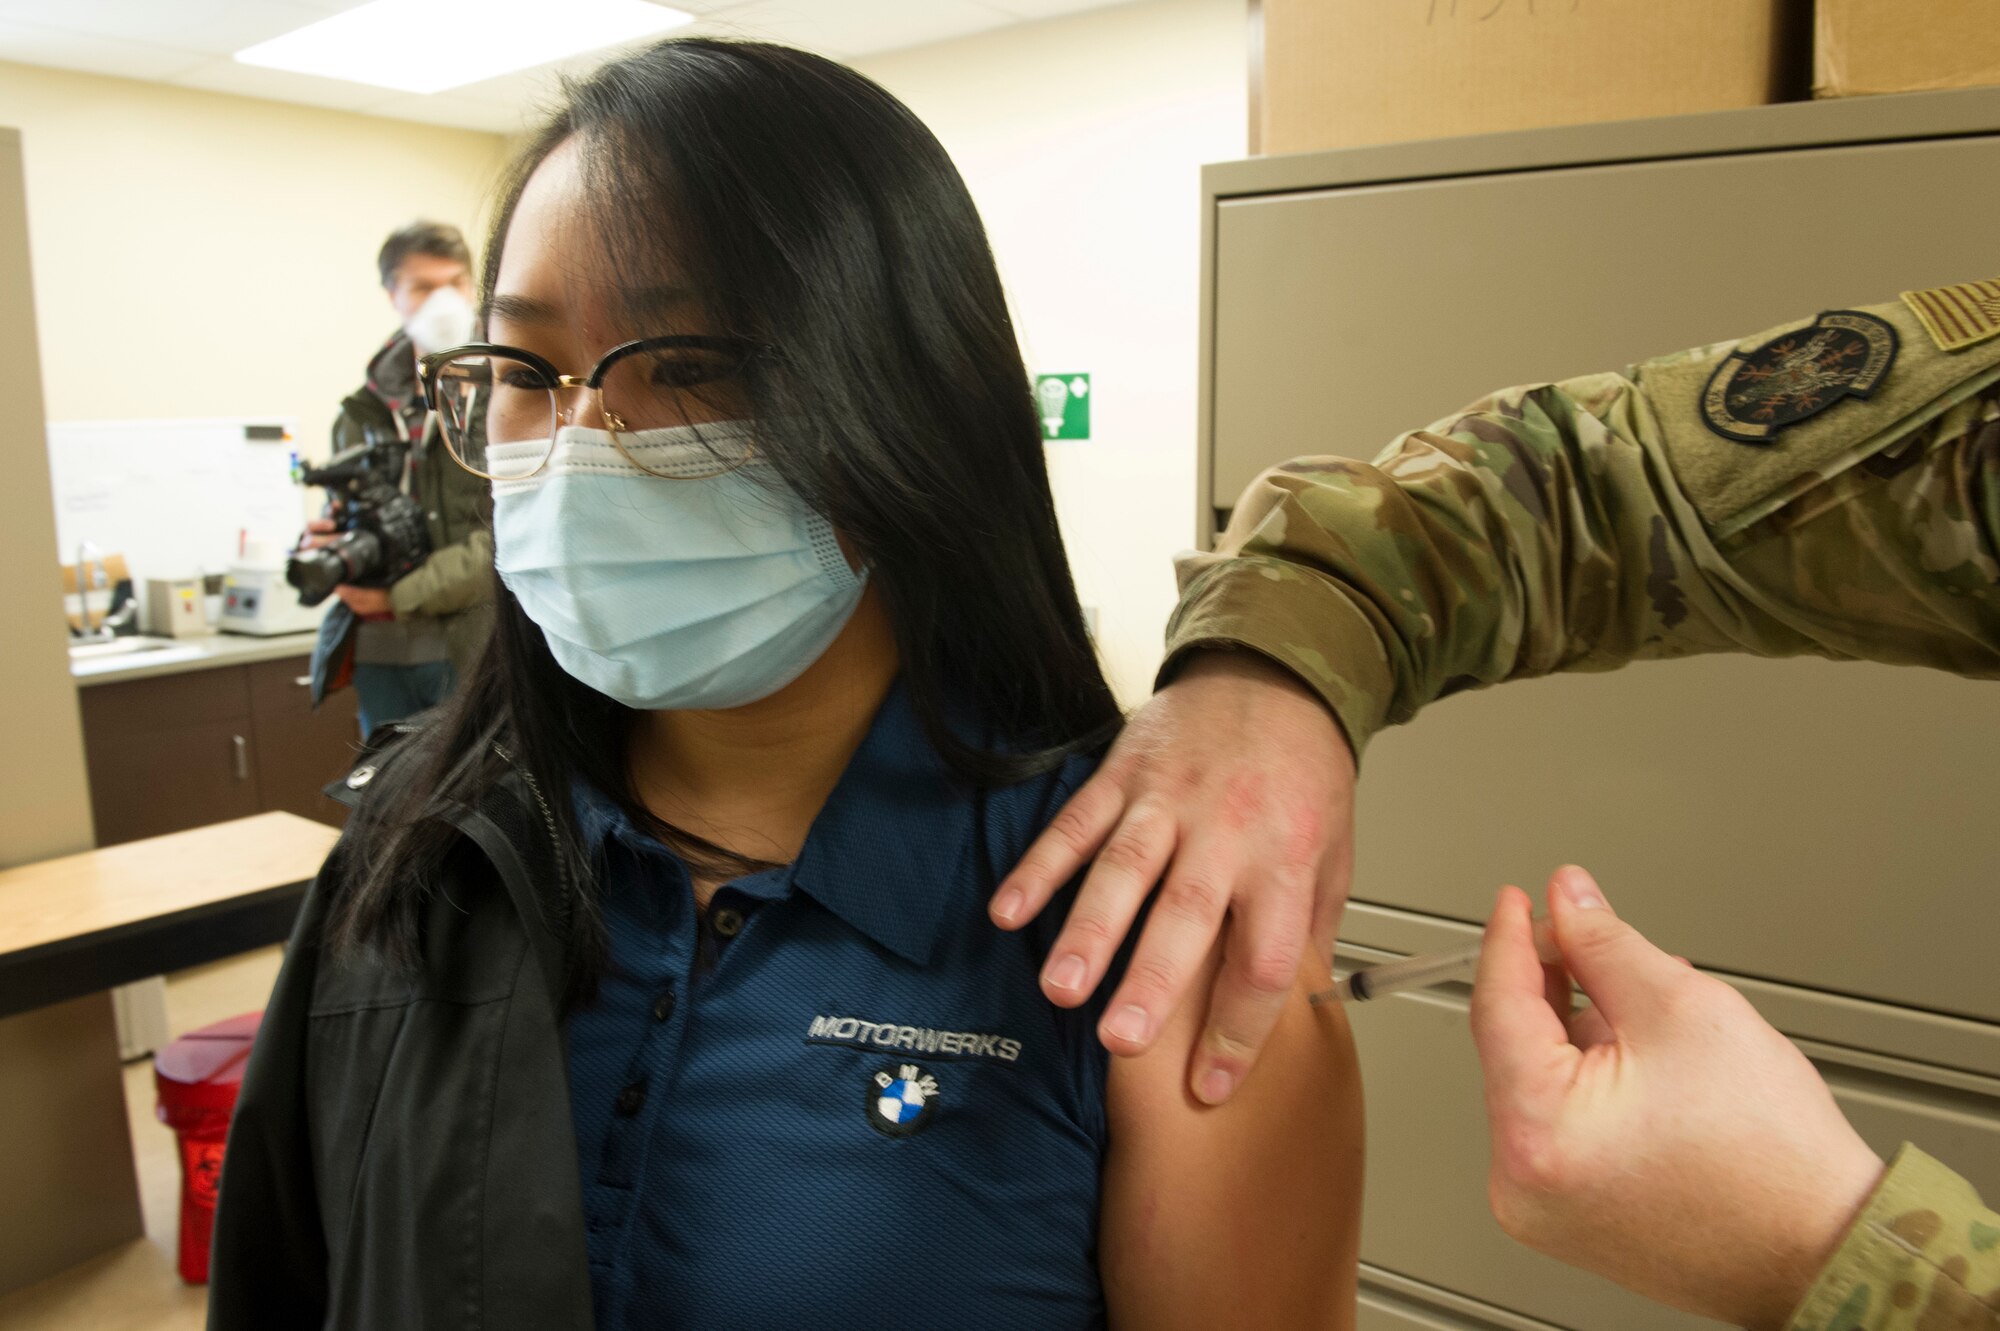 Staff Sgt. Amanda Thao, 934th Security Forces Squadron, receives her COVID-19 vaccine from a 934th Aeromedical Staging Squadron medical technician at Minneapolis-St.Paul Air Reserve Station on Jan. 22, 2021. The 934th Airlift Wing initiated the distribution of the vaccine in an effort to combat the spread of the COVID-19 virus. (U.S. Air Force photo by Chris Farley)